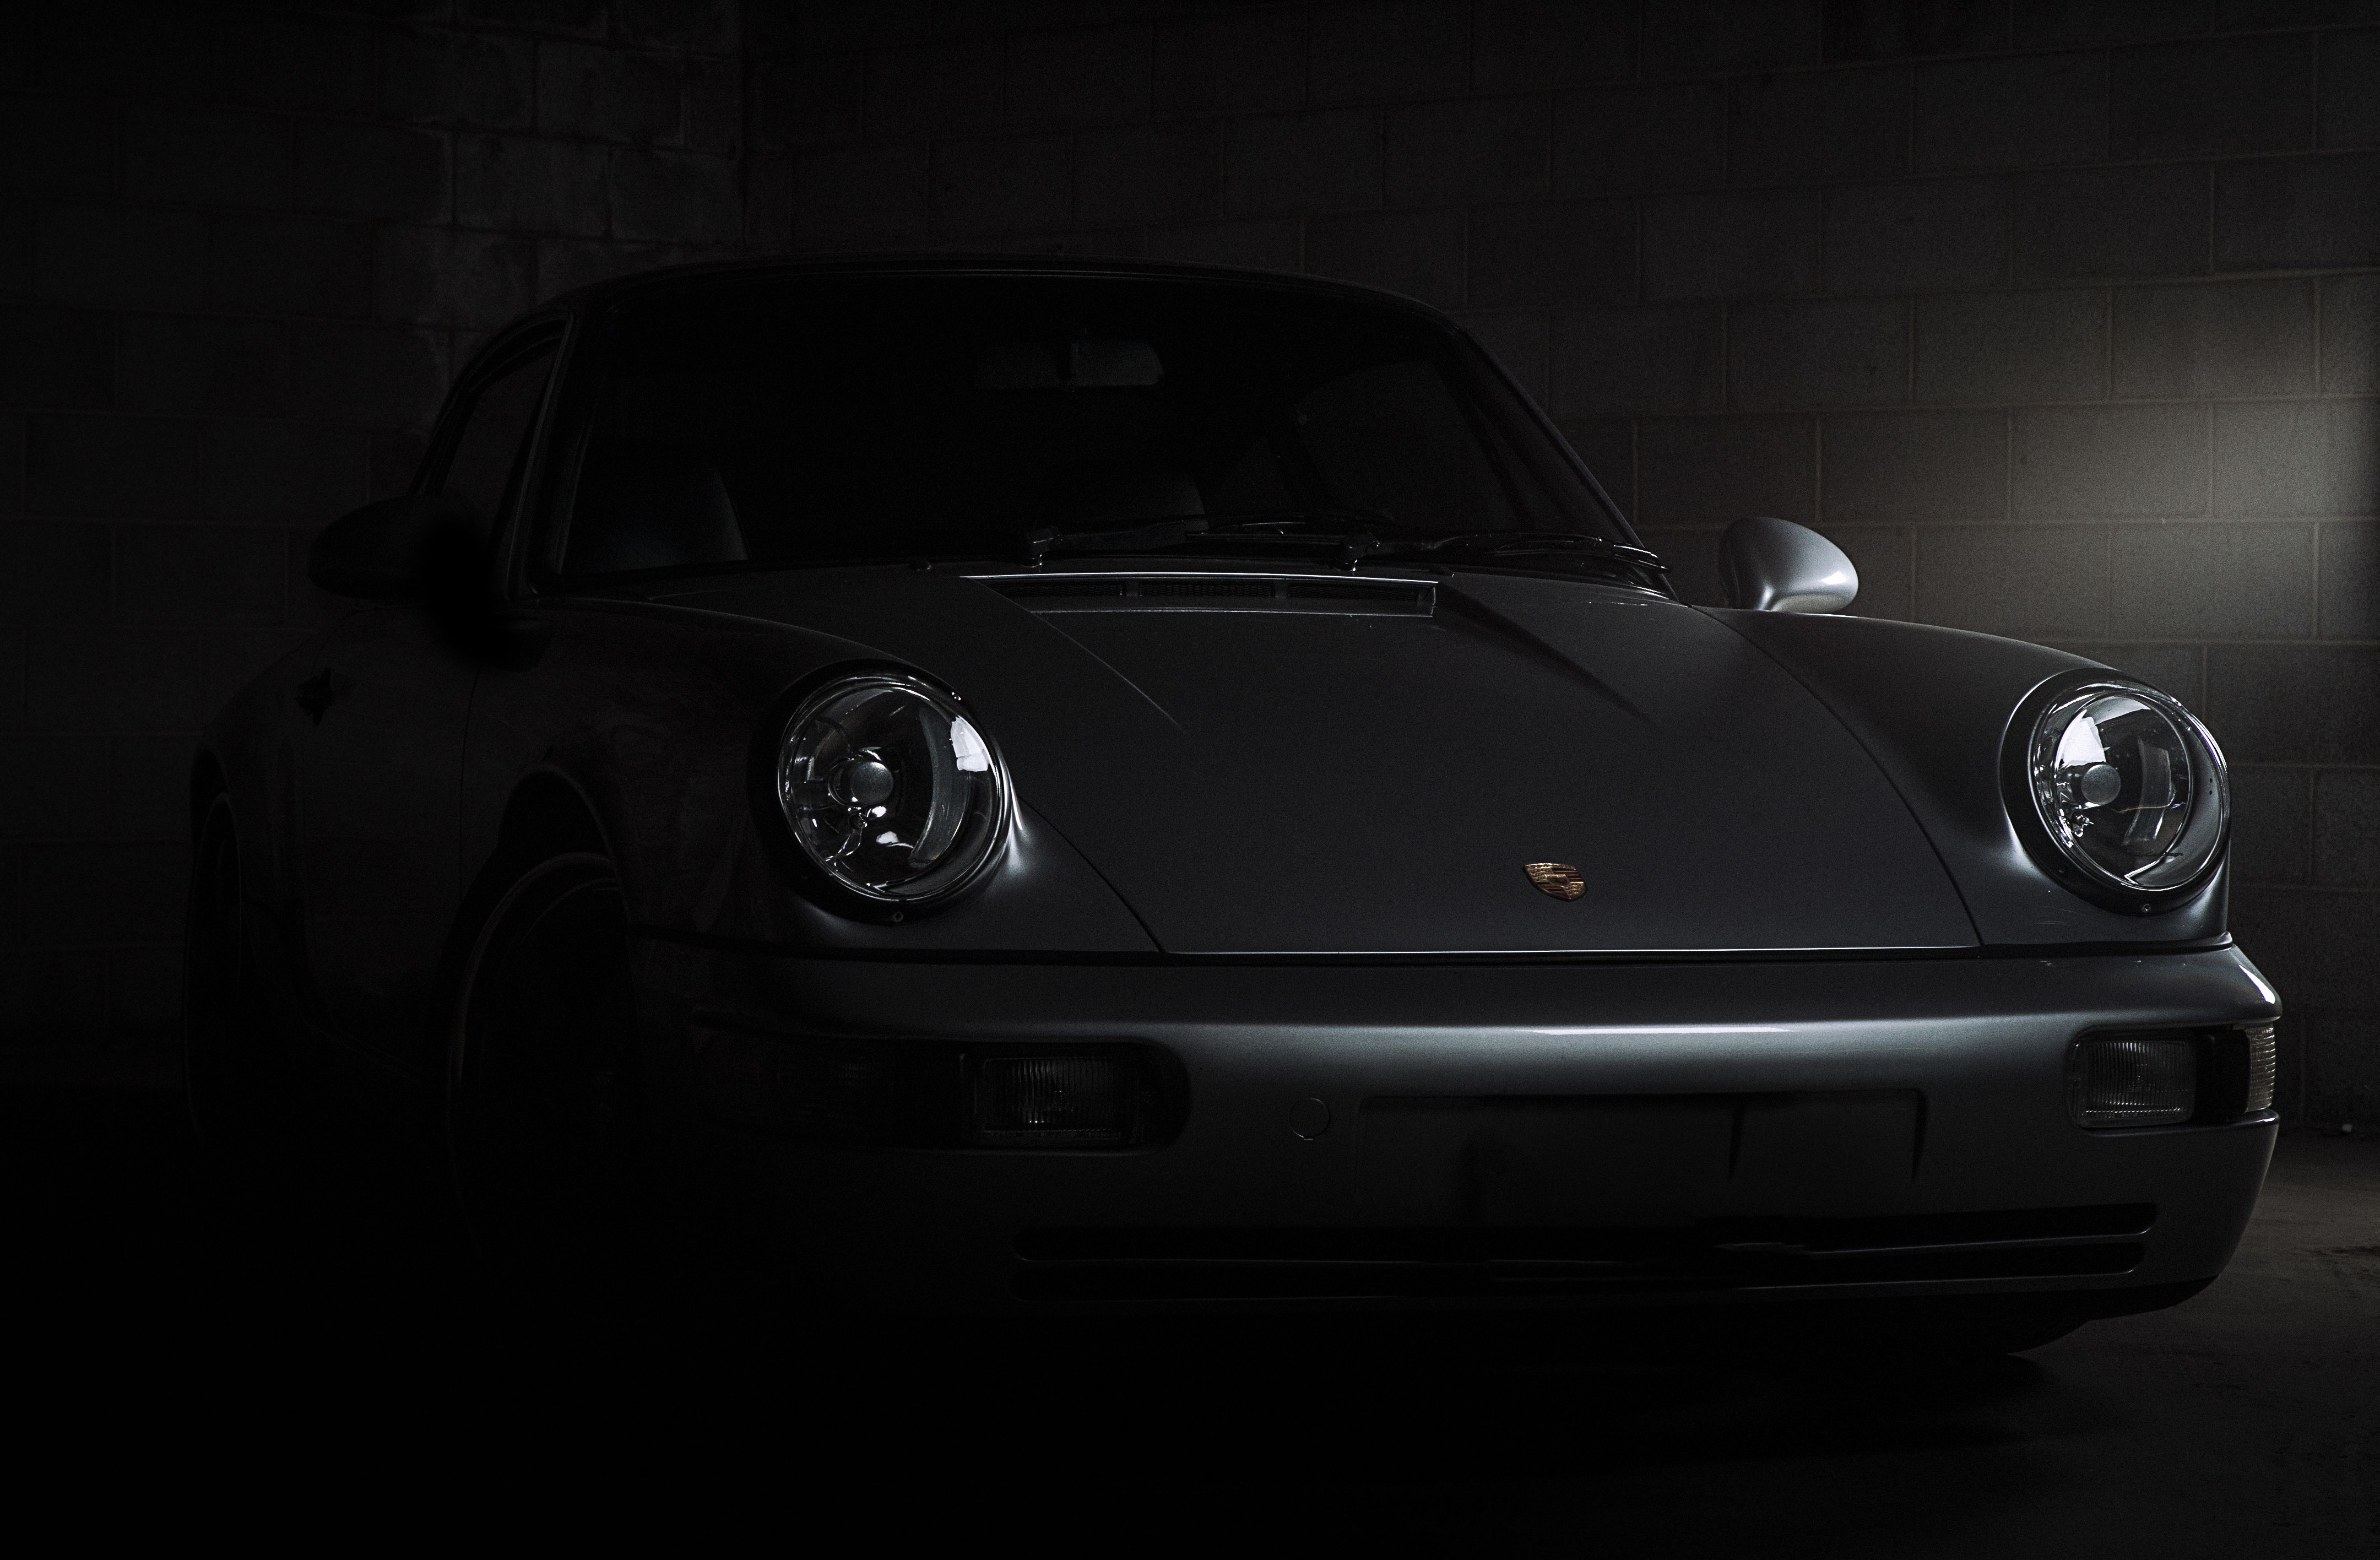 Your Ridiculously Awesome Porsche 911 Wallpaper Is Here